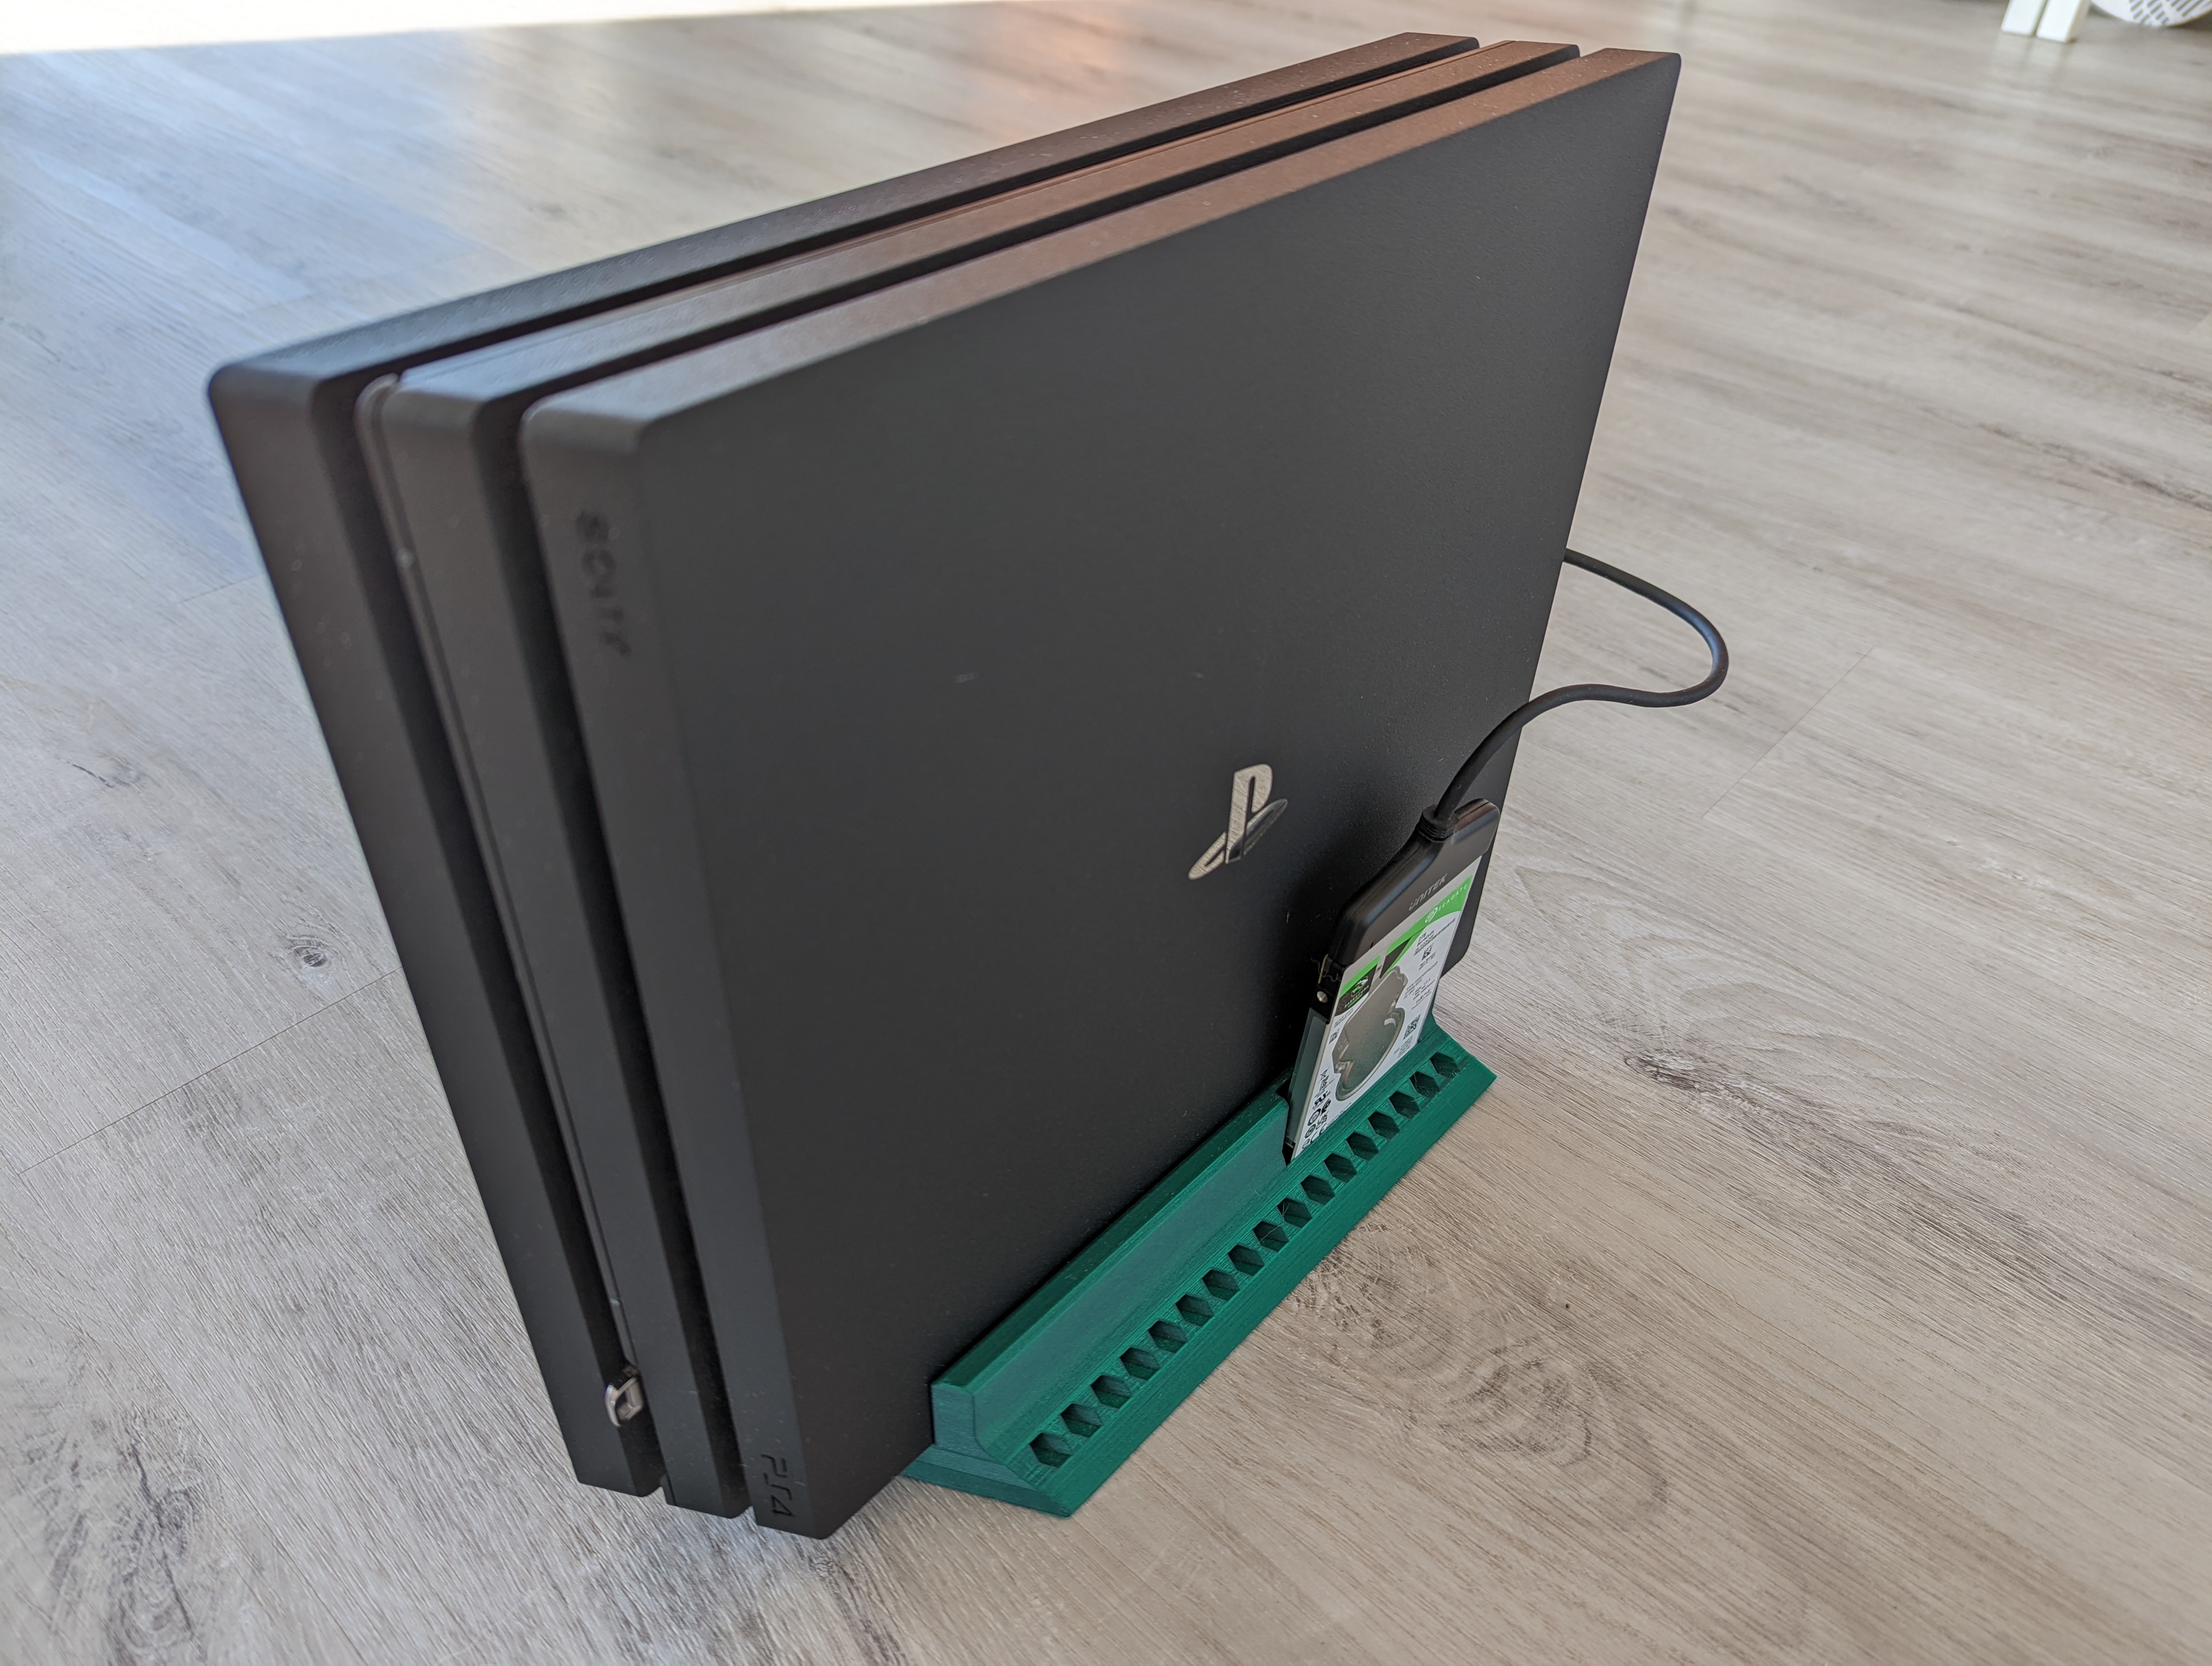 Vertical stand for PS4 Pro with external drive slot